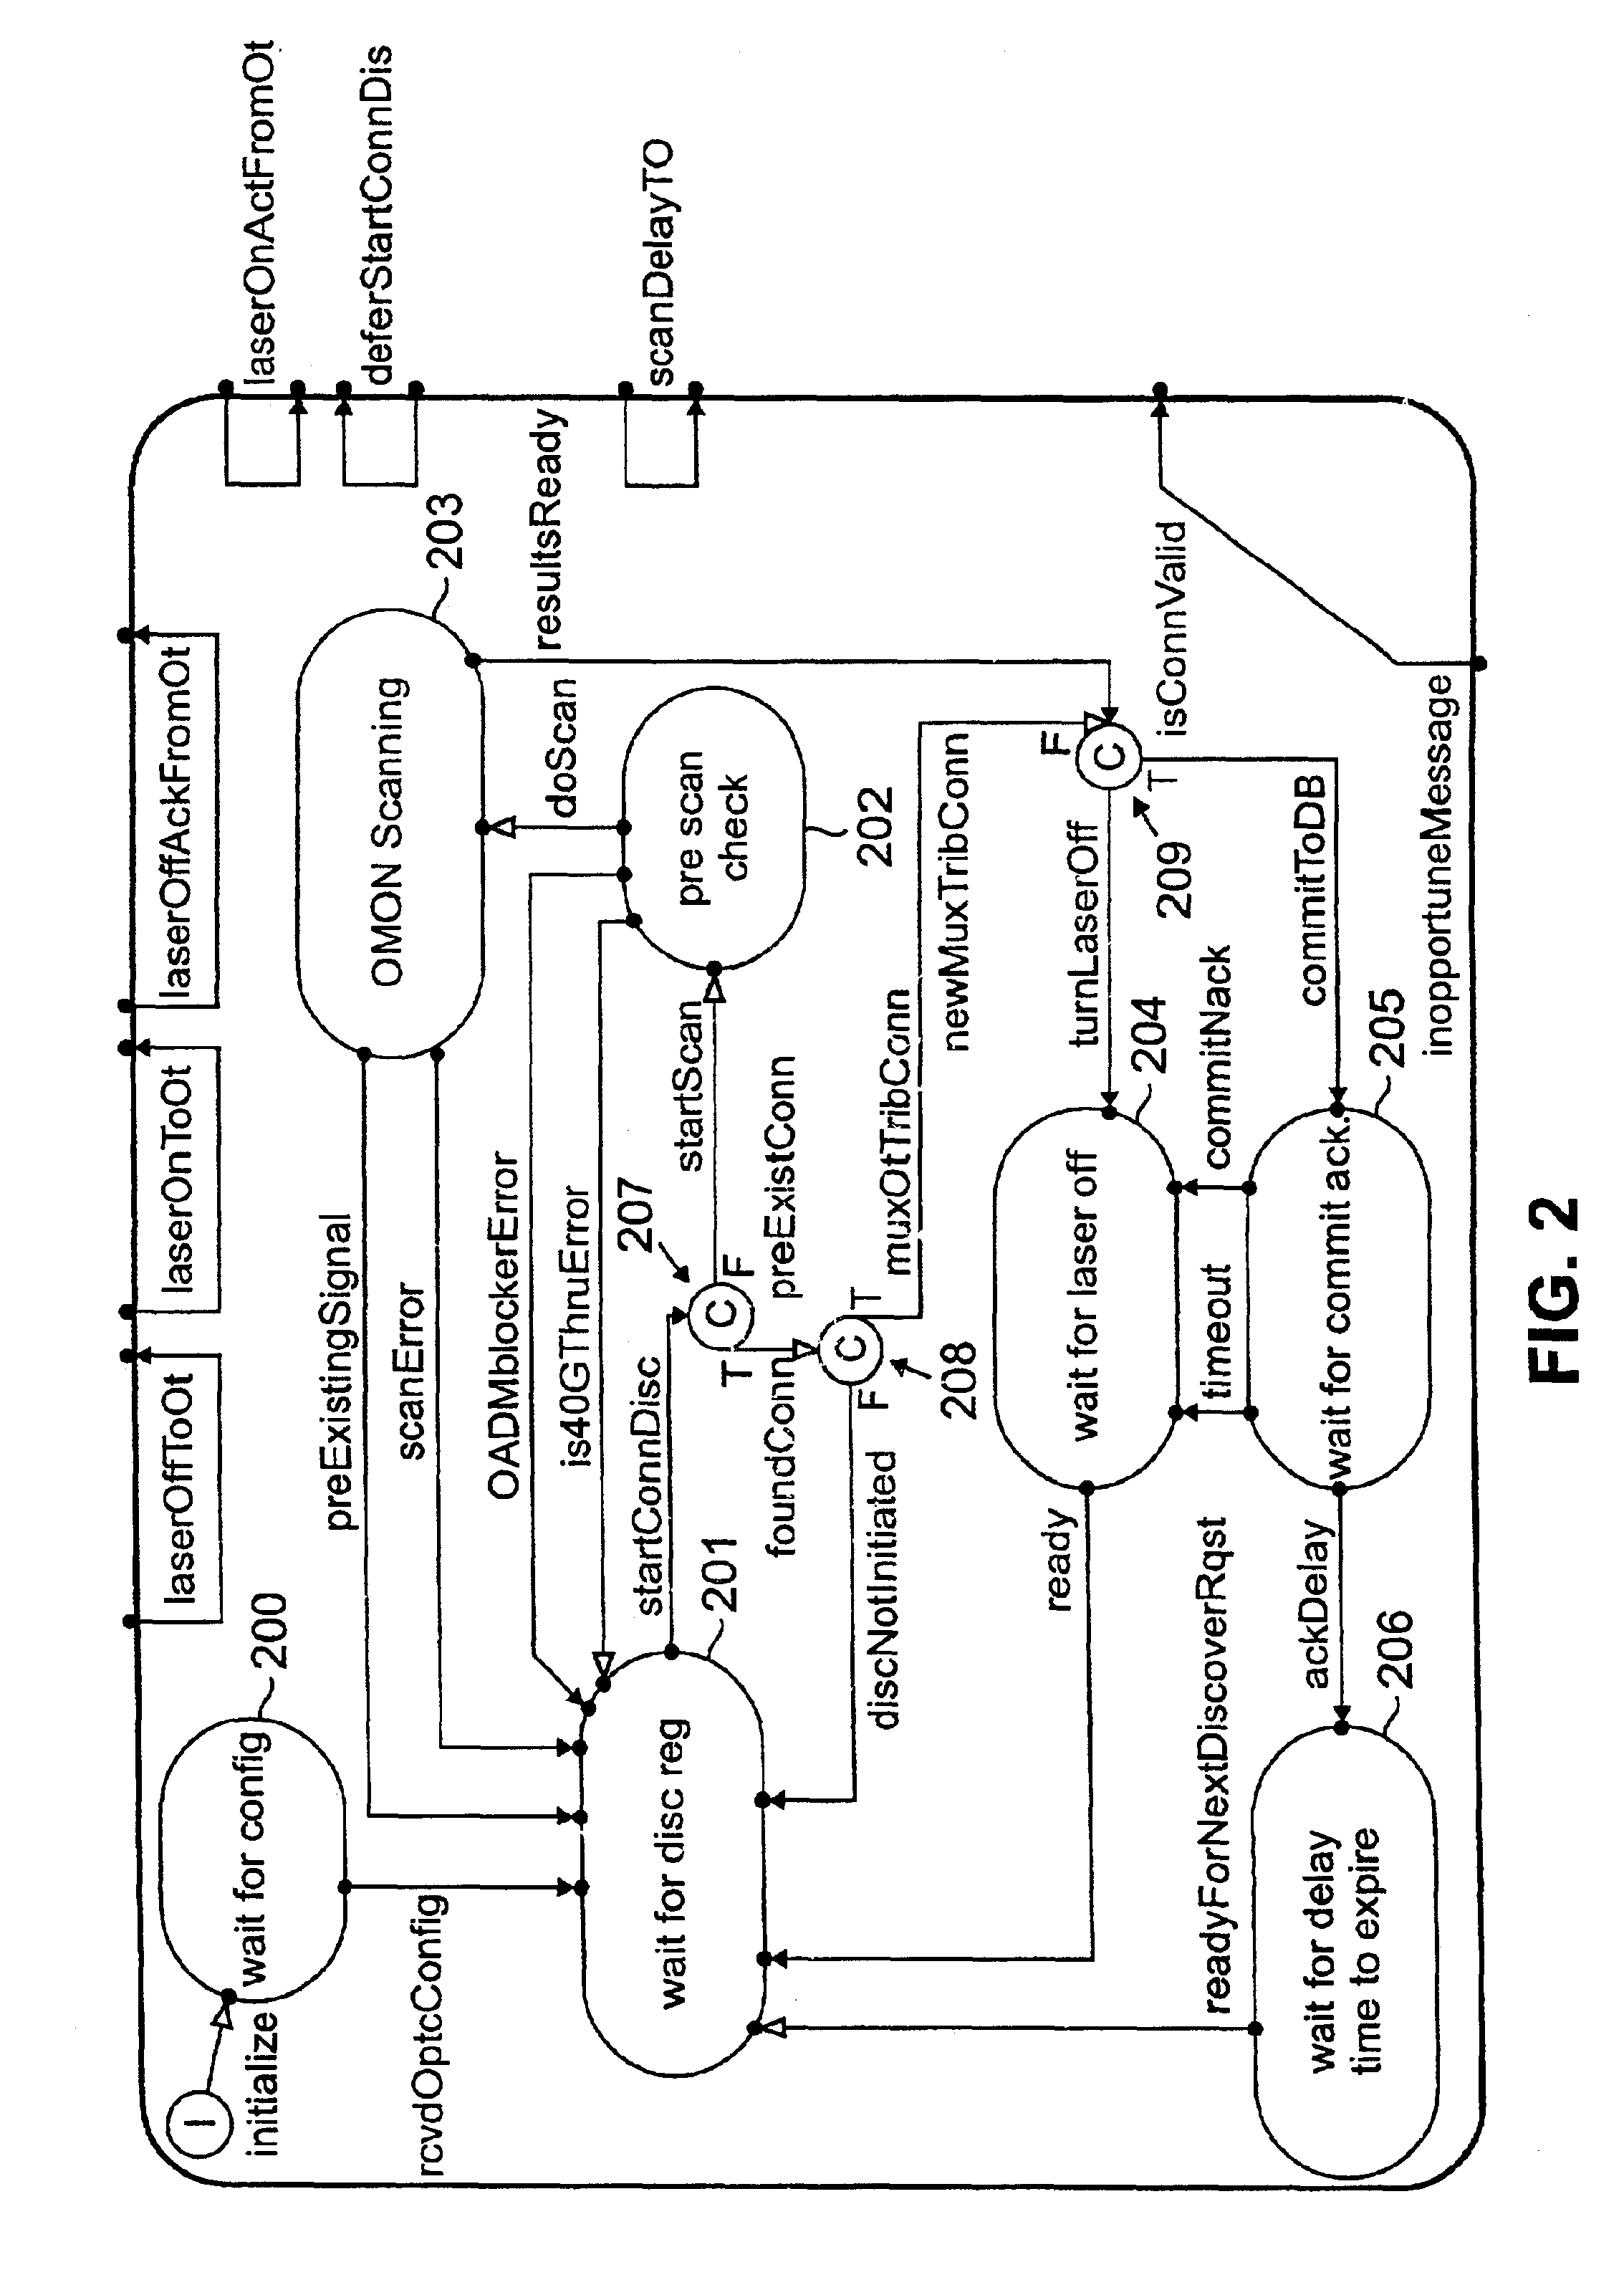 Method for automatically provisioning a network element